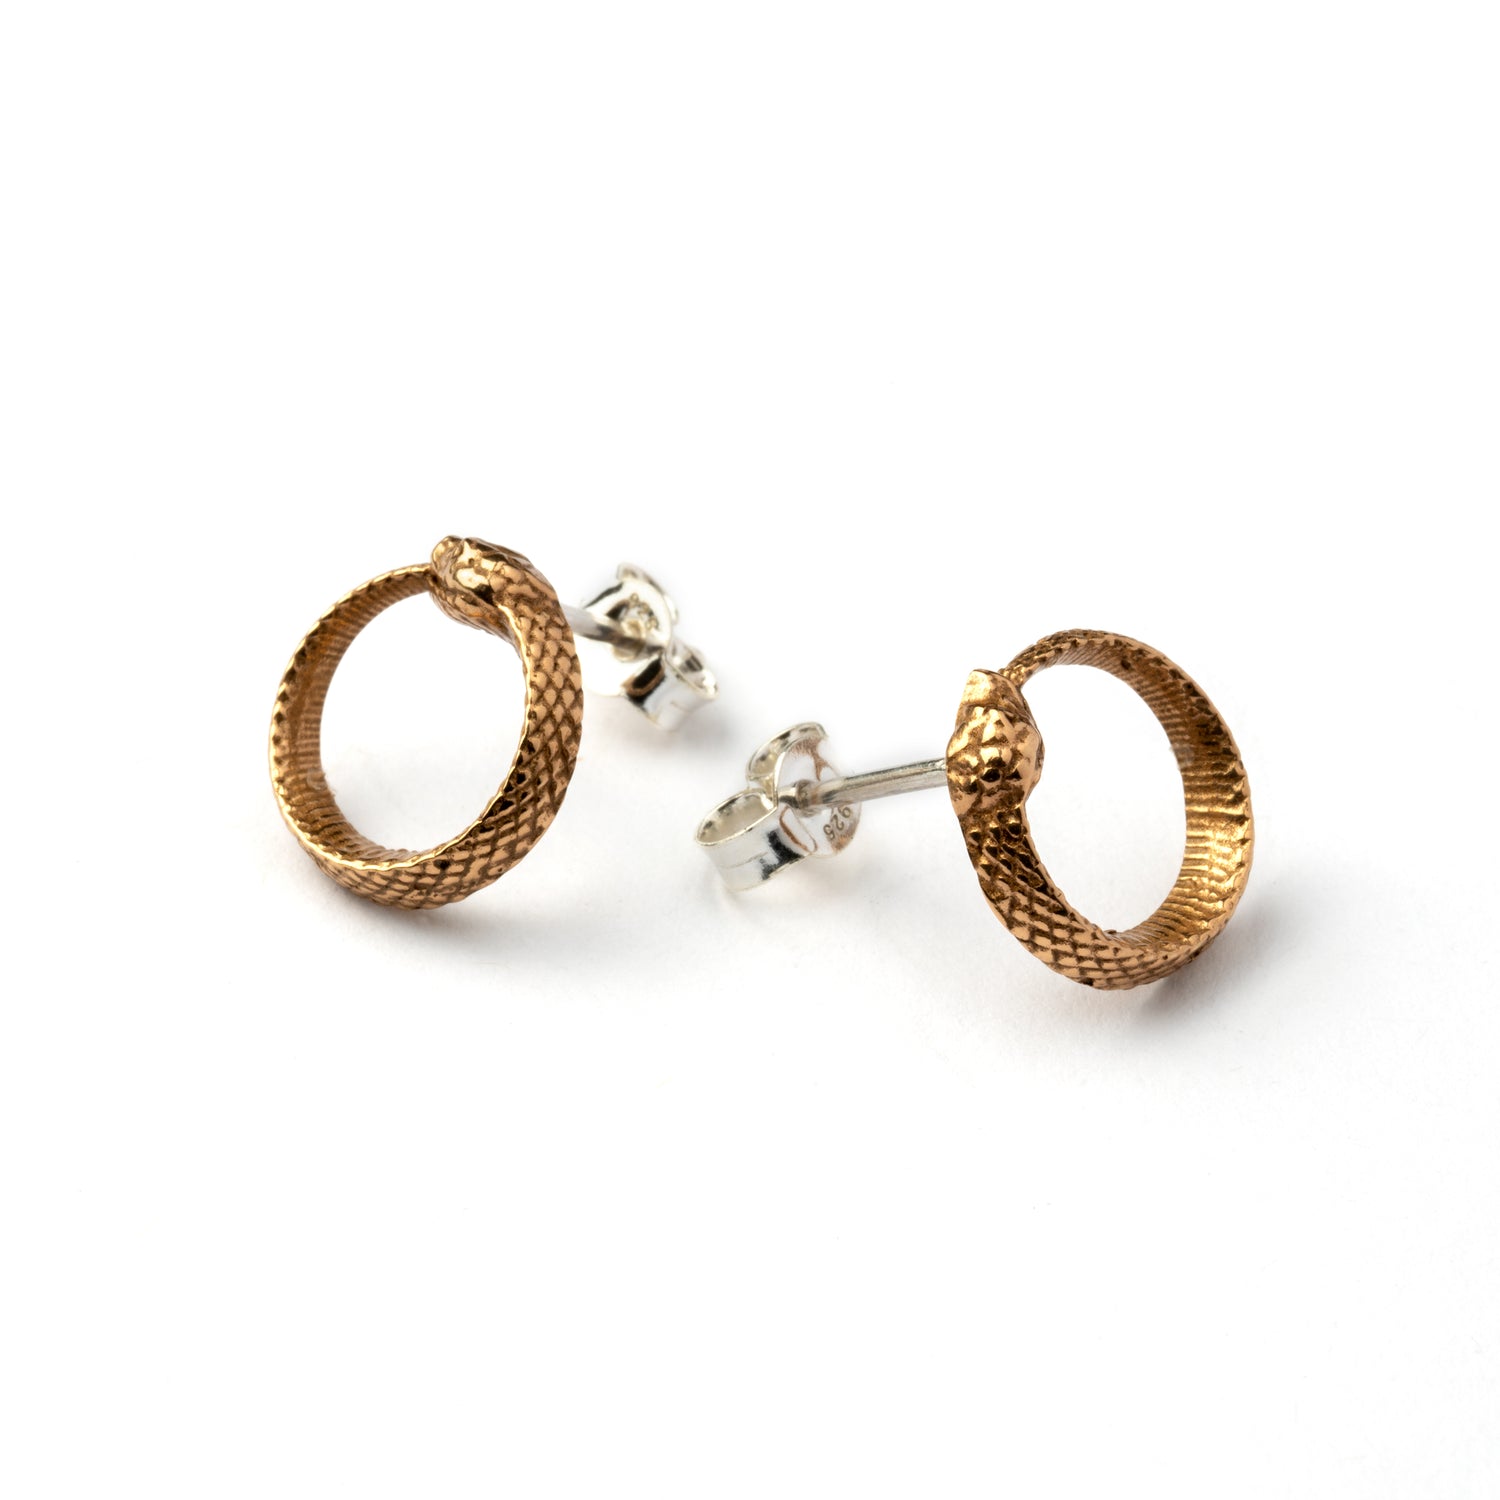 Ouroboros snake Bronze Ear Studs front and side view